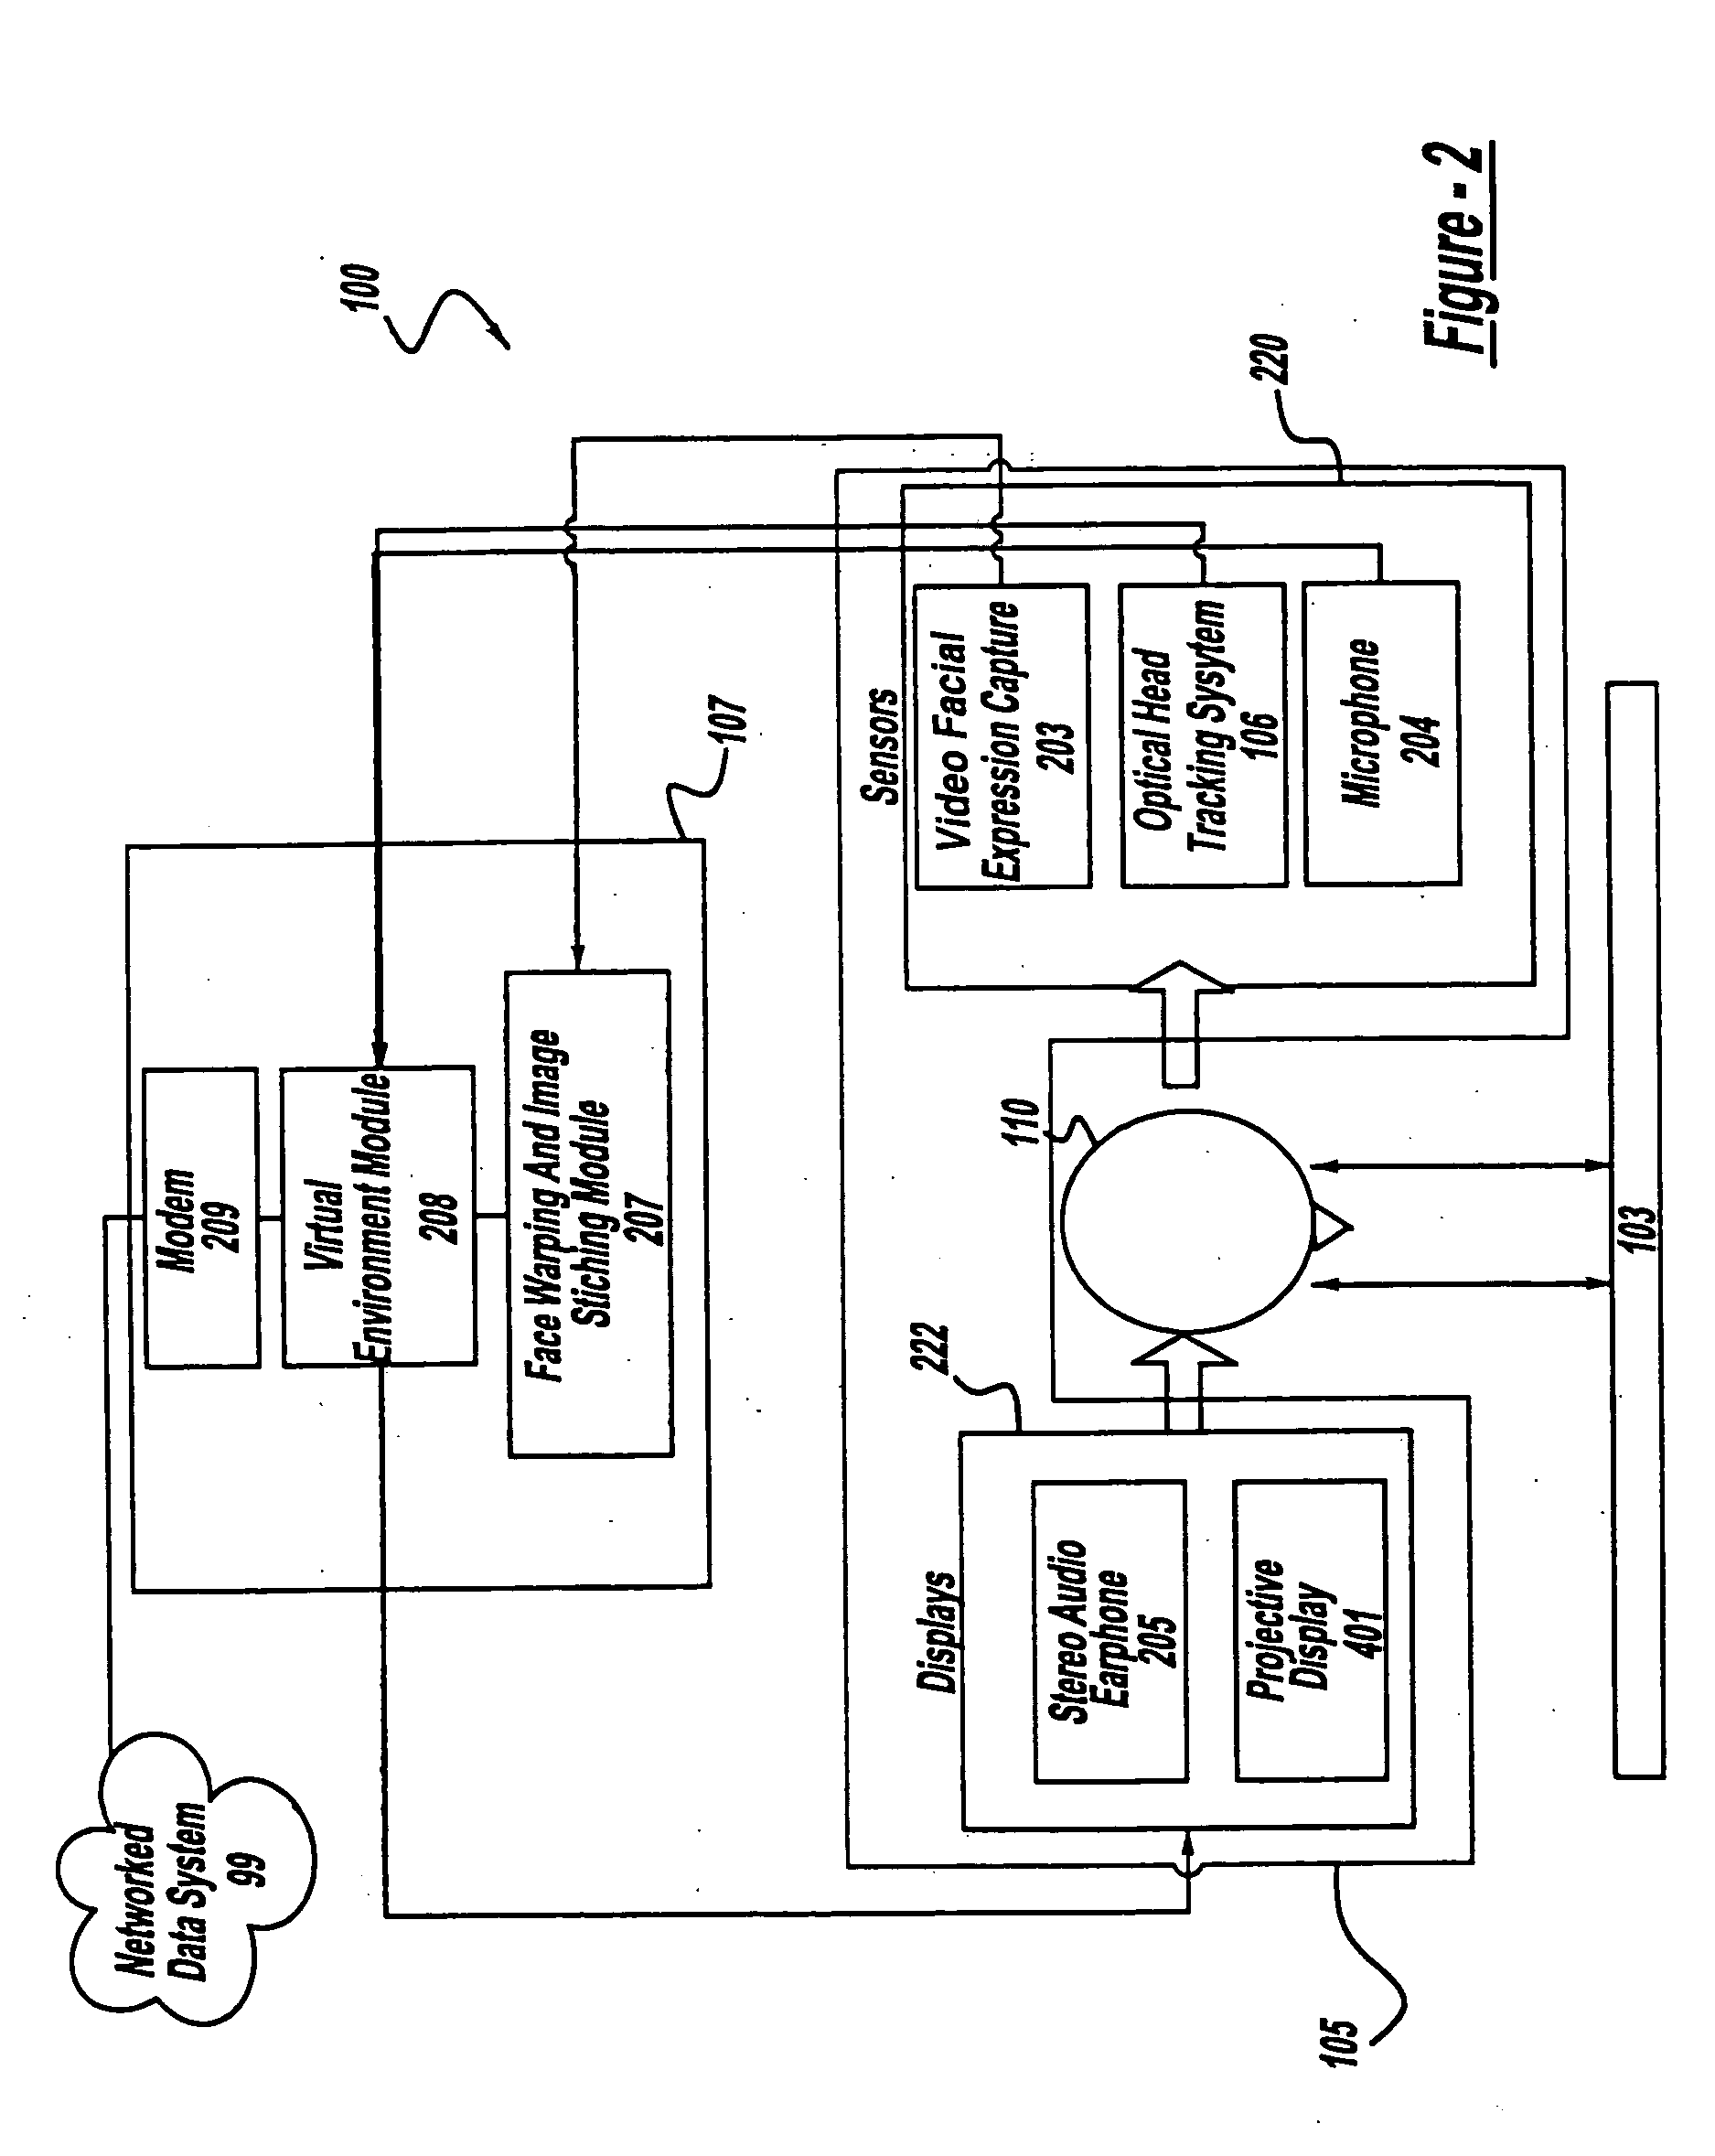 Mobile face capture and image processing system and method